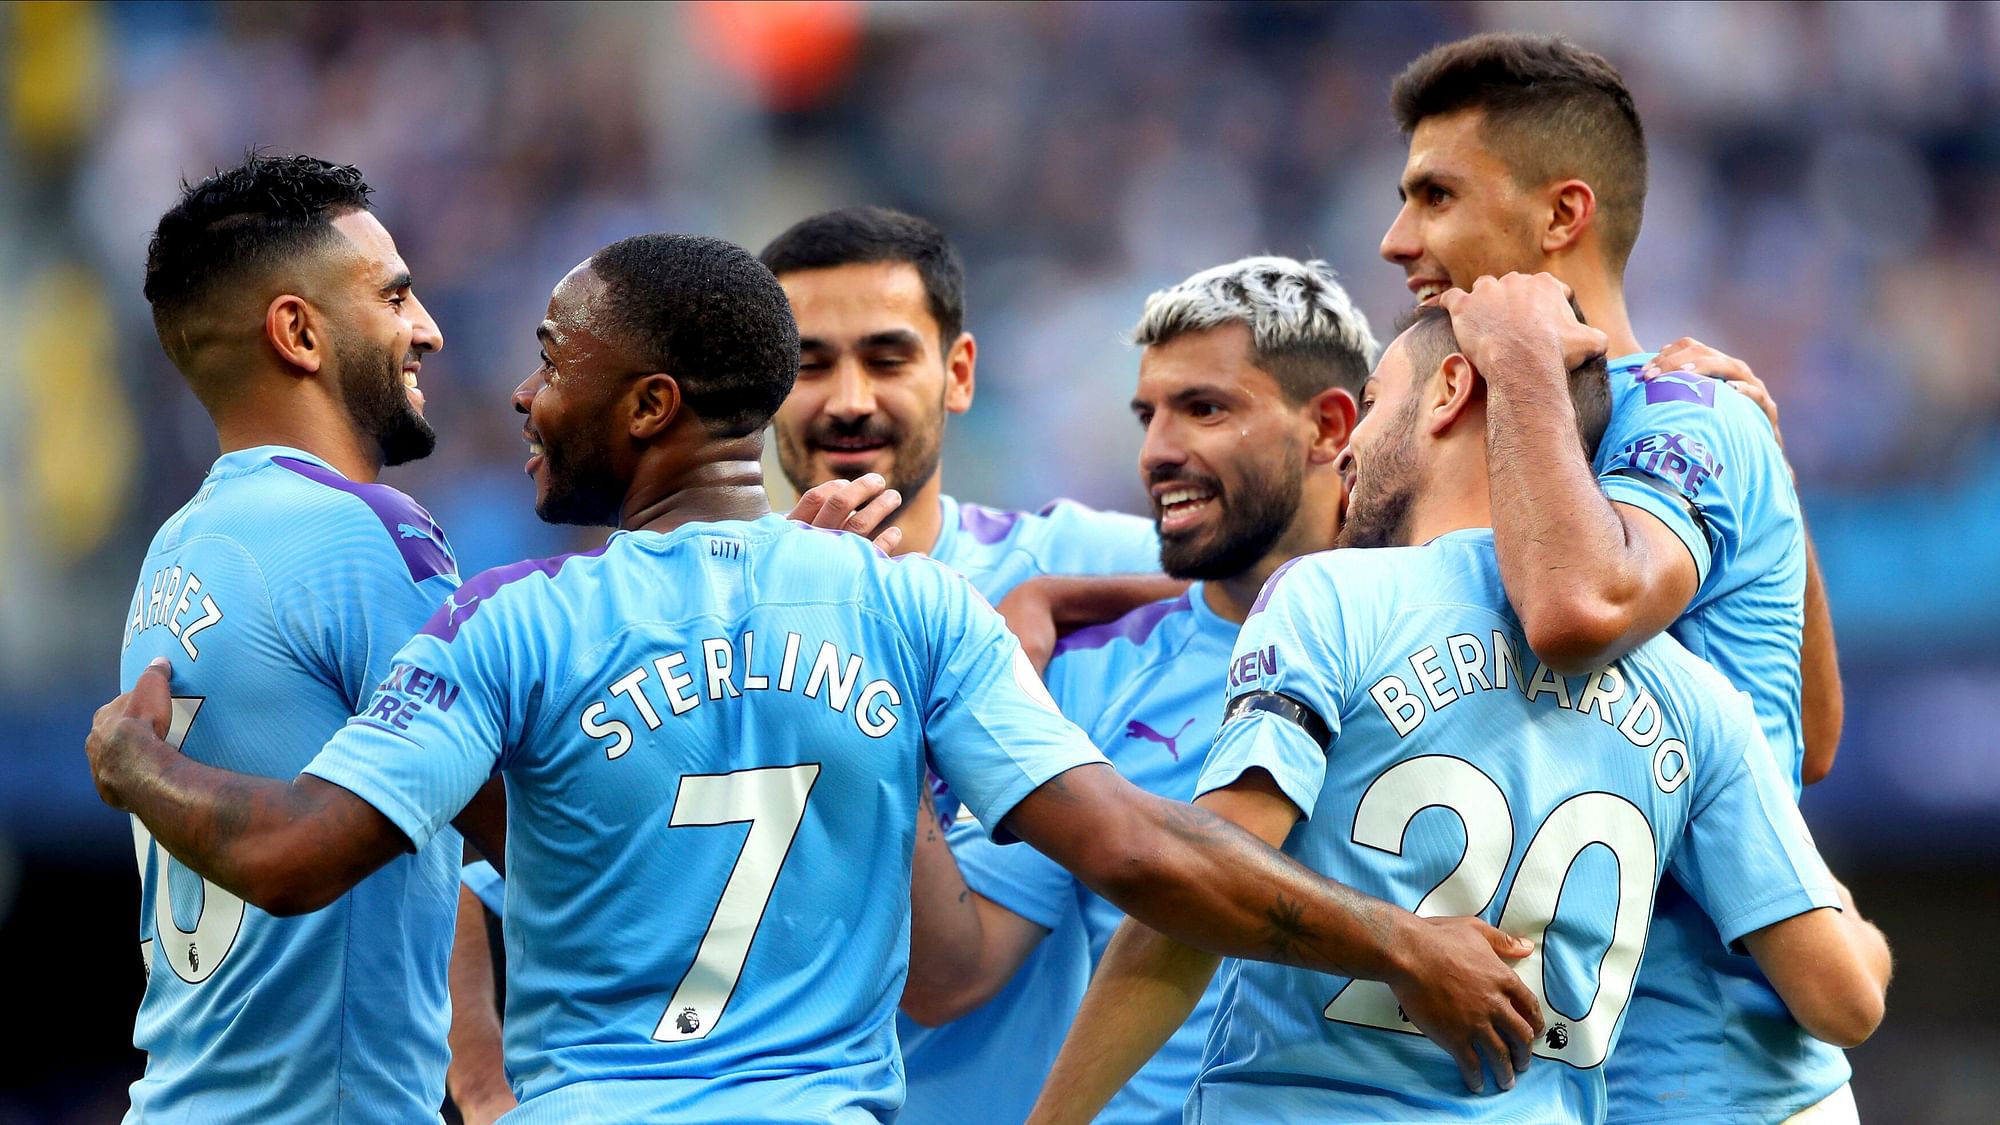 Manchester City is hot on Liverpool’s heels in second place, already seemingly reprising the northwest clubs’ duel for the title last season.